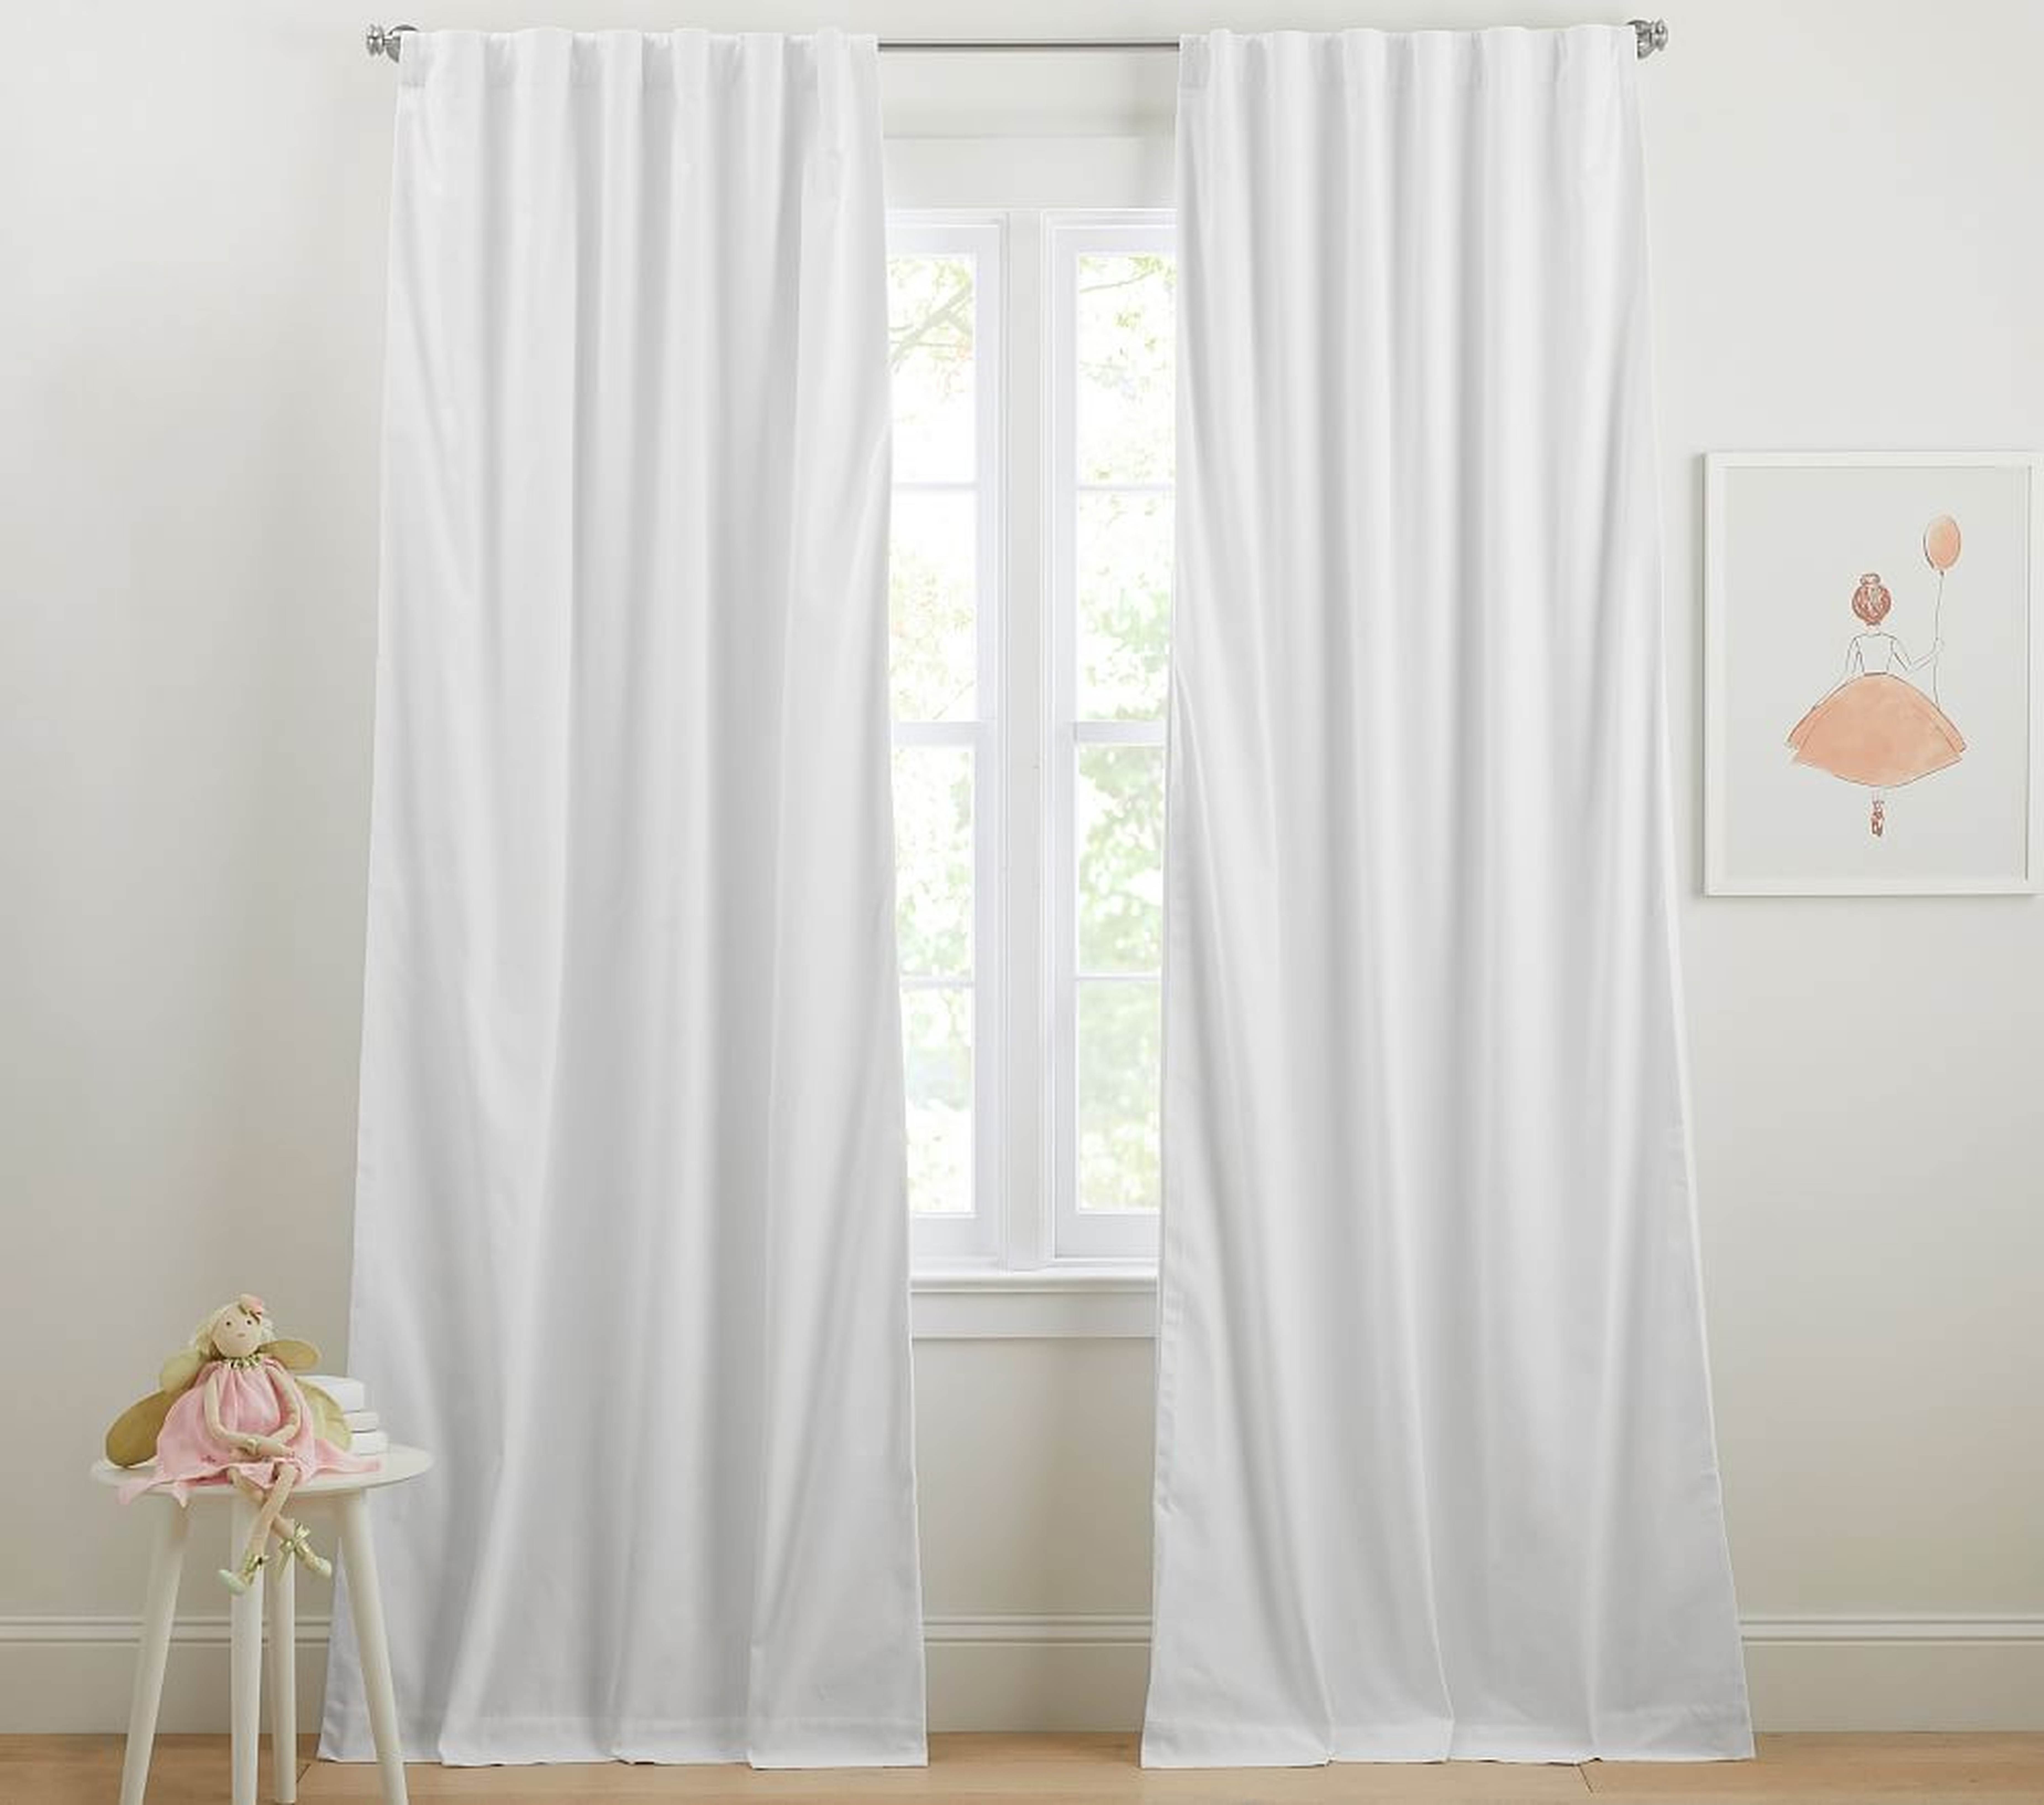 Soothing Sleep Noise Reducing Blackout Curtain, 84 Inches, White, Set of 2 - Pottery Barn Kids